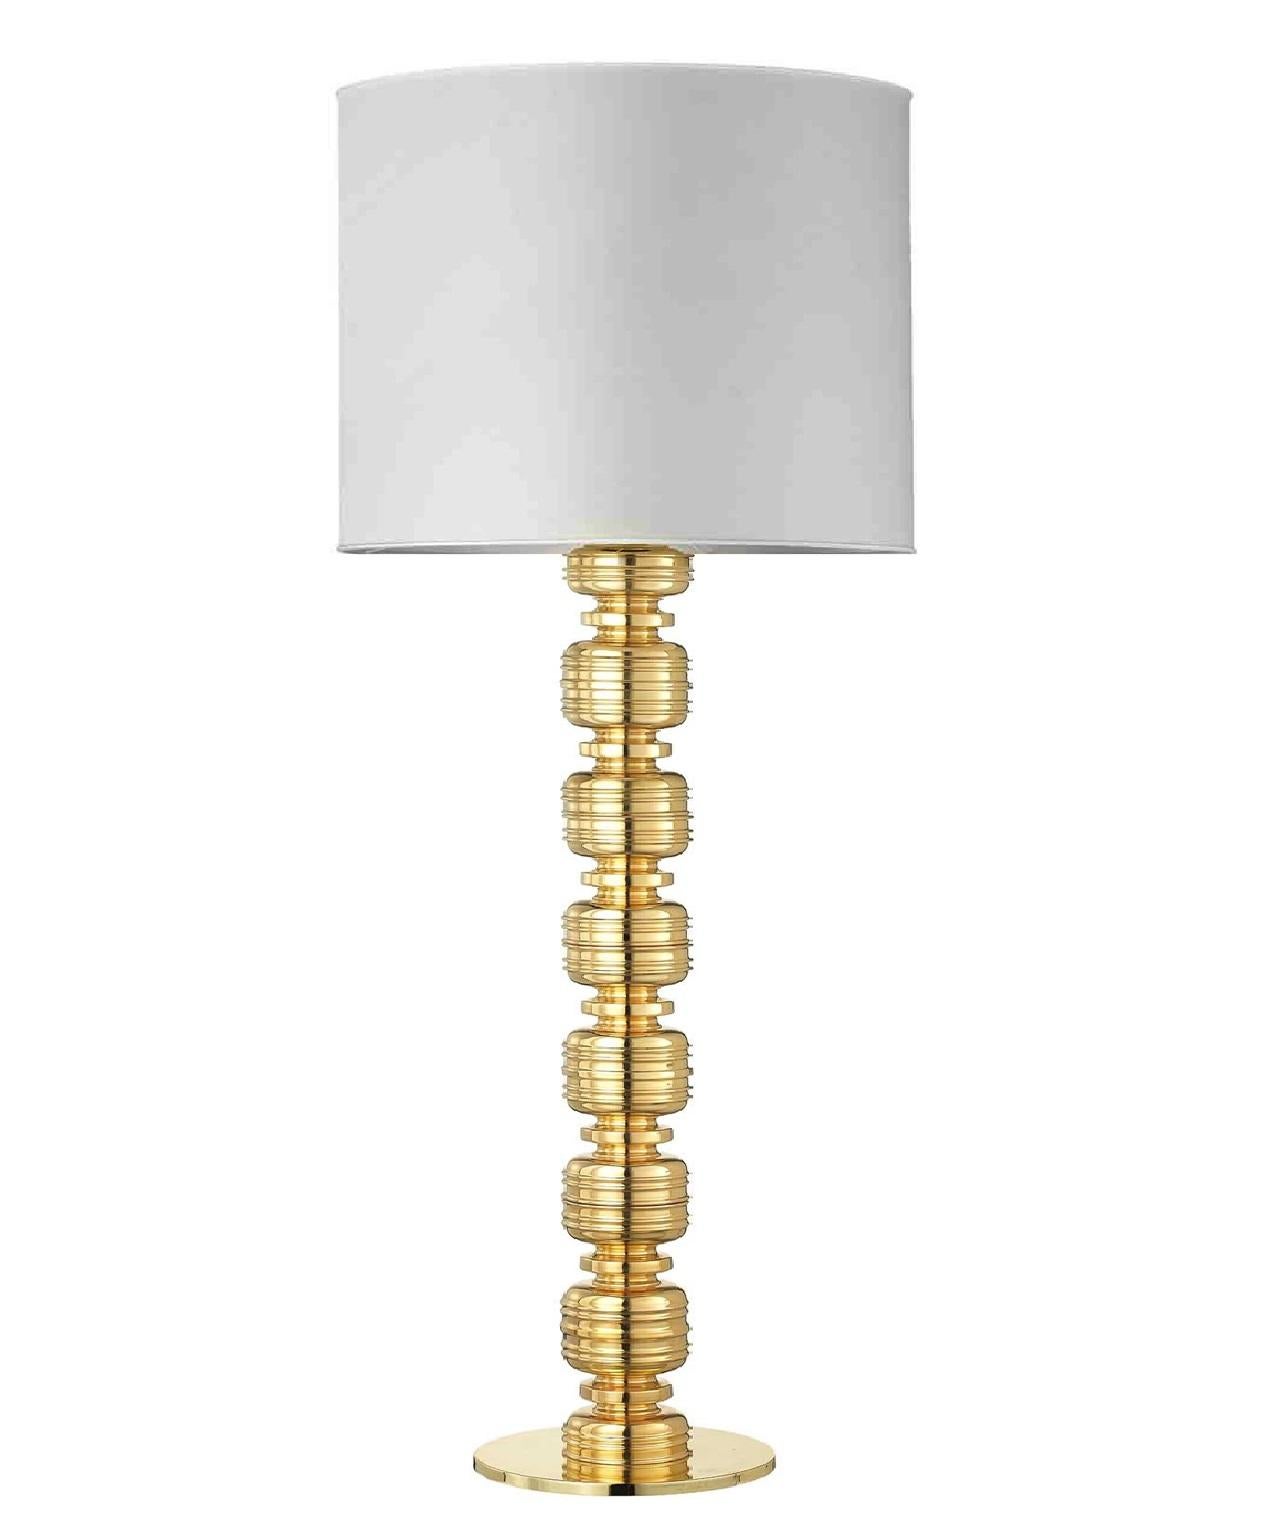 Hand-Crafted THEA 3, Ceramic Lamp Handcrafted in 24-Karat Gold by Gabriella B. Made in Italy For Sale